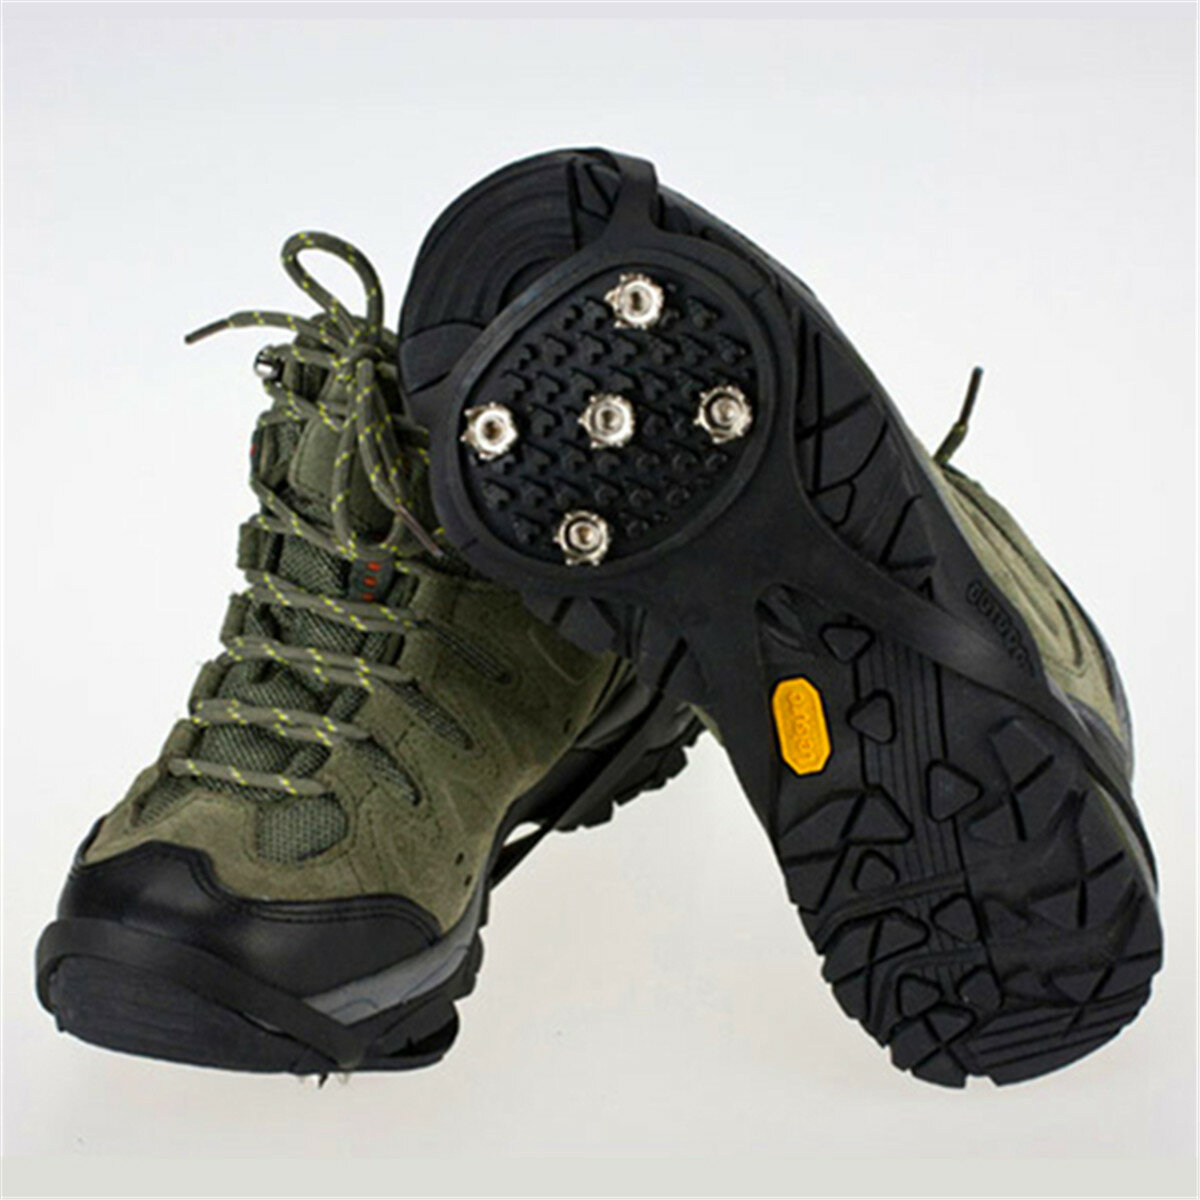 Anti-slip-Non-slip-Shoes-Cover-Spikes-Crampons-Grip-Ice-Snow-Footwear-933223-2